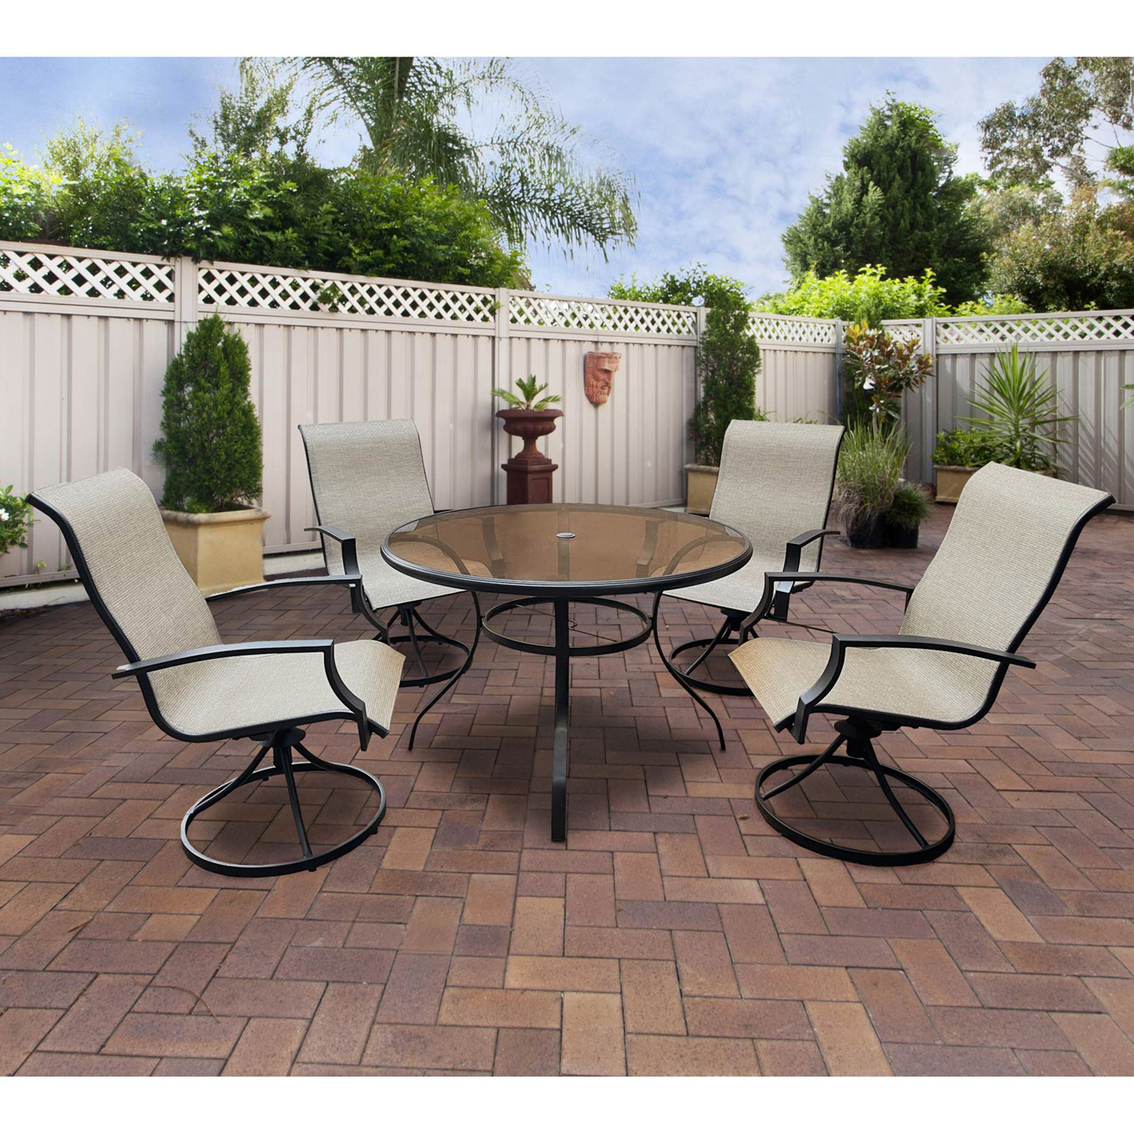 Home Creations Brentwood 5 pc. Dining Set - Image 2 of 2